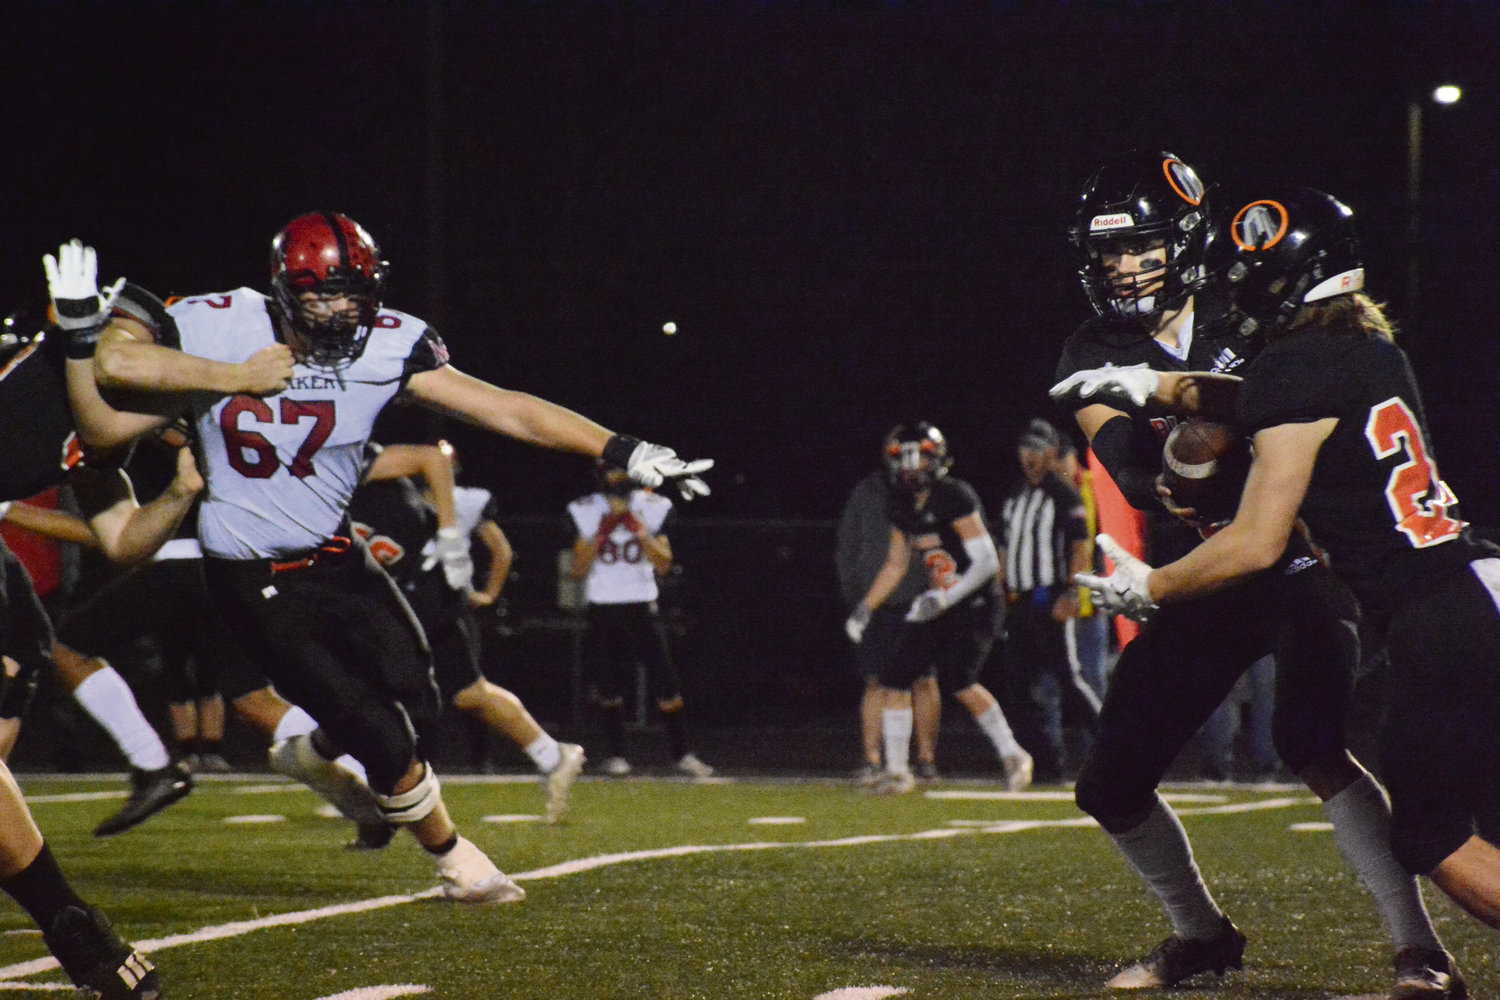 Senior quarterback Kael Evinger hands the ball off to sophomore Colby Shipp in Blaine High School’s homecoming game on September 30. Blaine’s football team took on Mount Baker High School during the hard-fought game at the Borderite stadium.